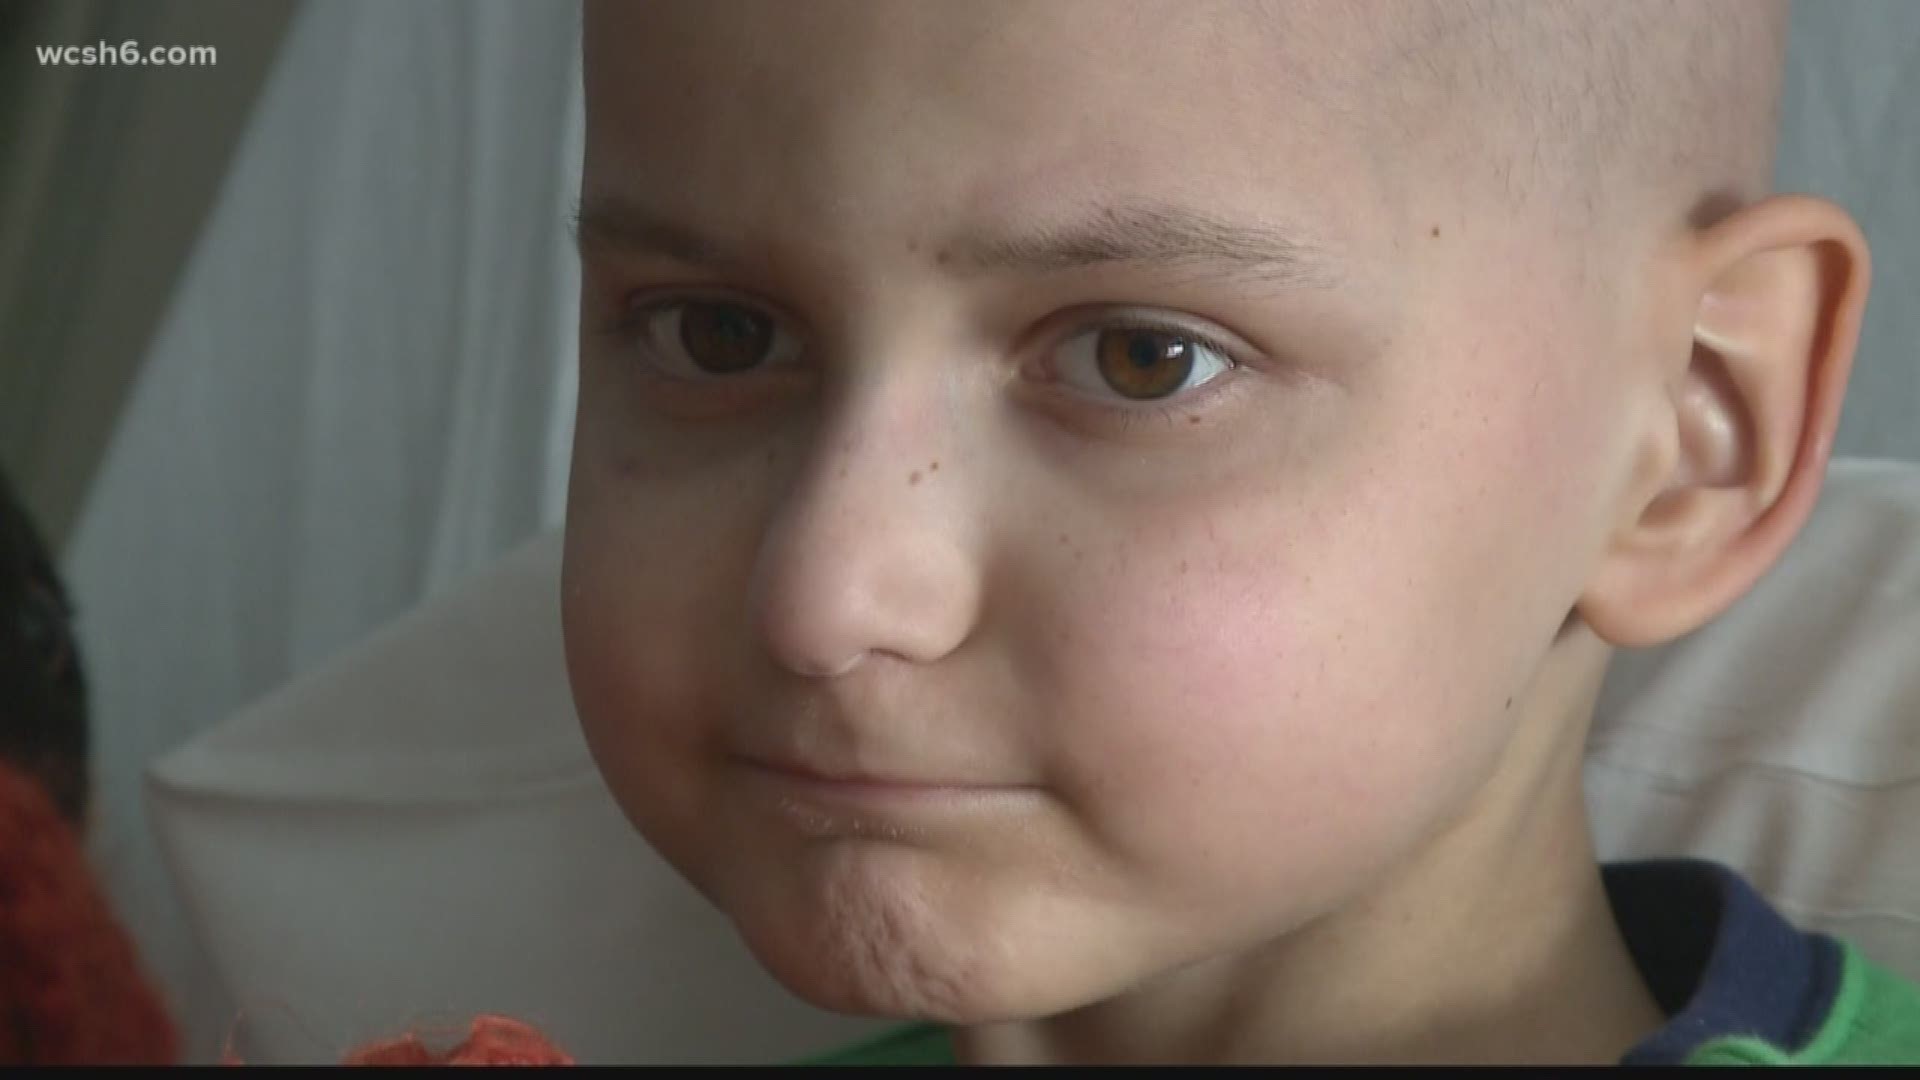 NOW:9-year-old cancer patient celebrating Christmas early